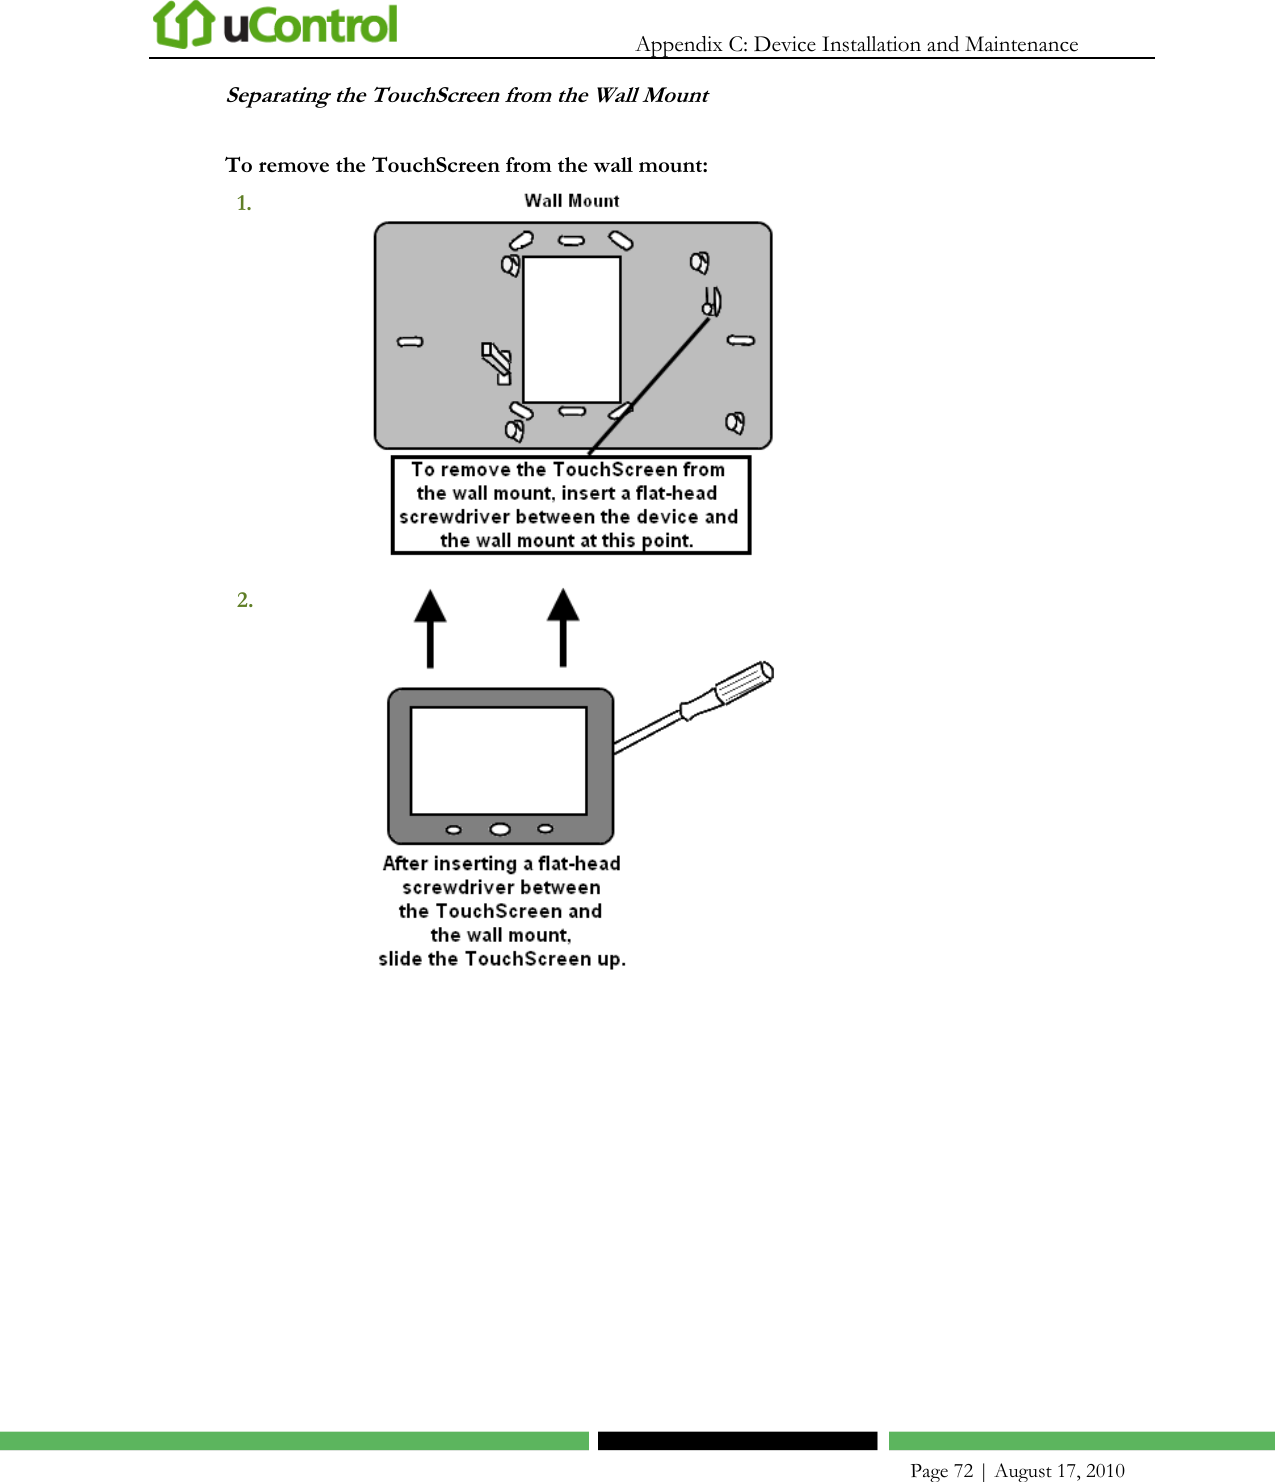   Appendix C: Device Installation and Maintenance    Page 72 | August 17, 2010 Separating the TouchScreen from the Wall Mount To remove the TouchScreen from the wall mount: 1.    2.    